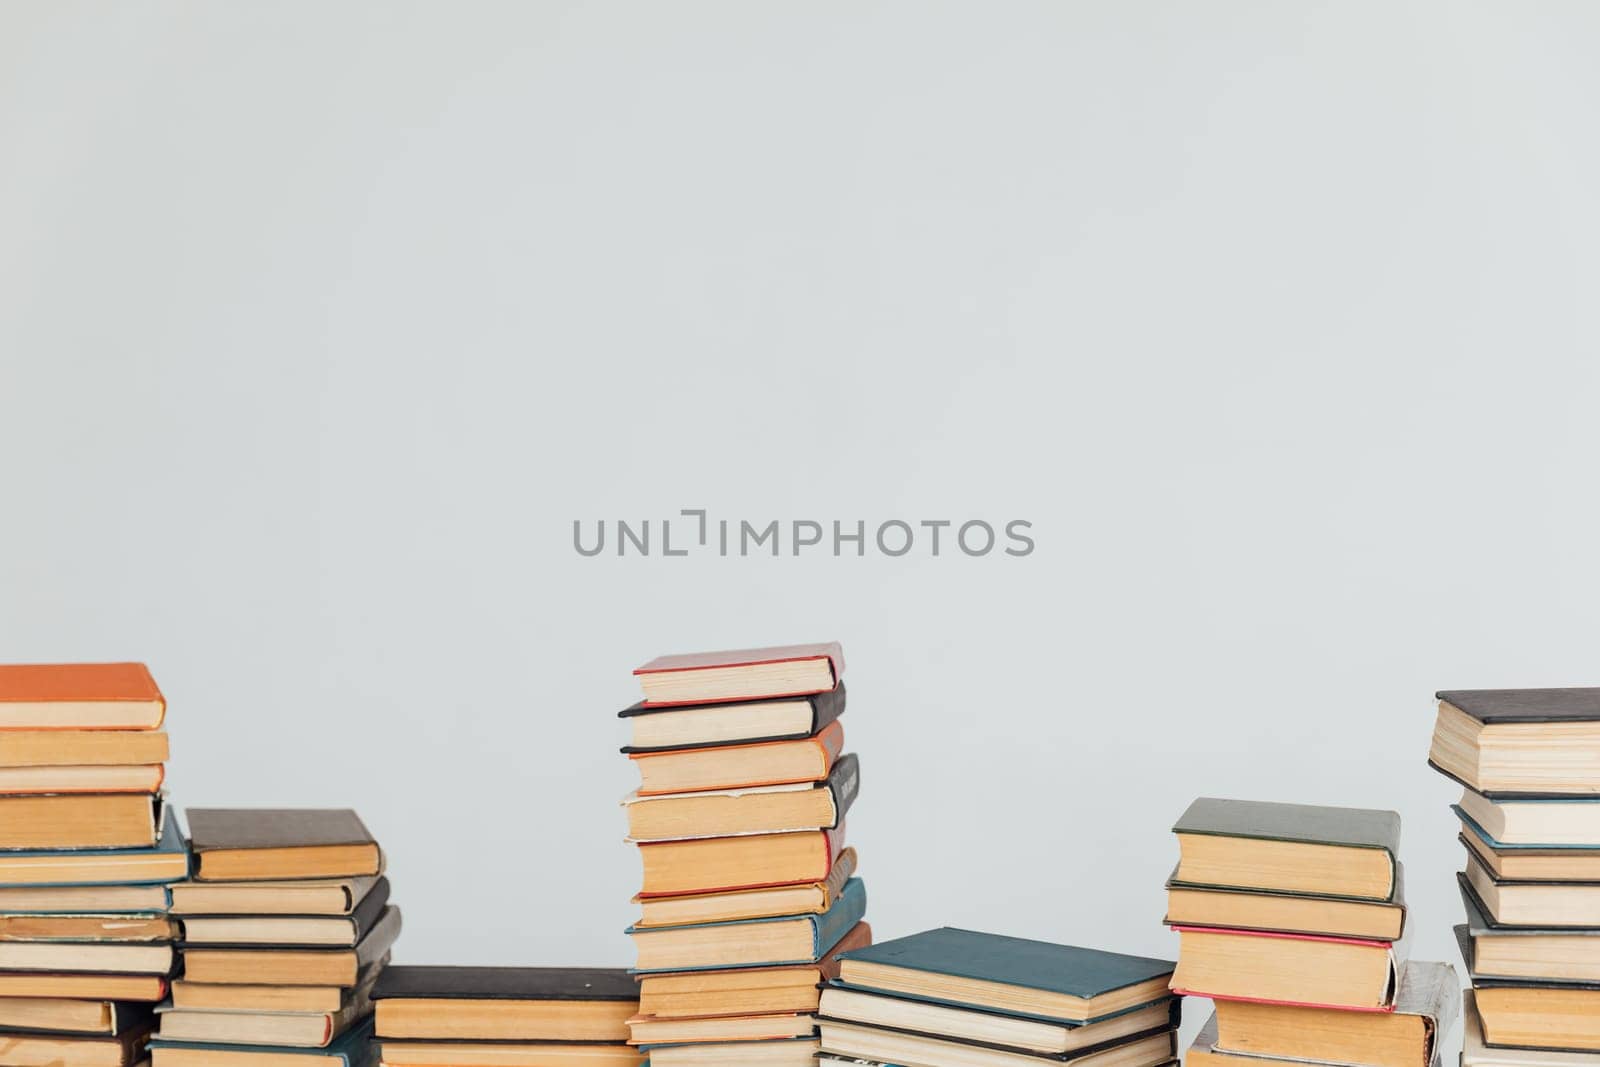 Stacks of educational books in university library on white background by Simakov